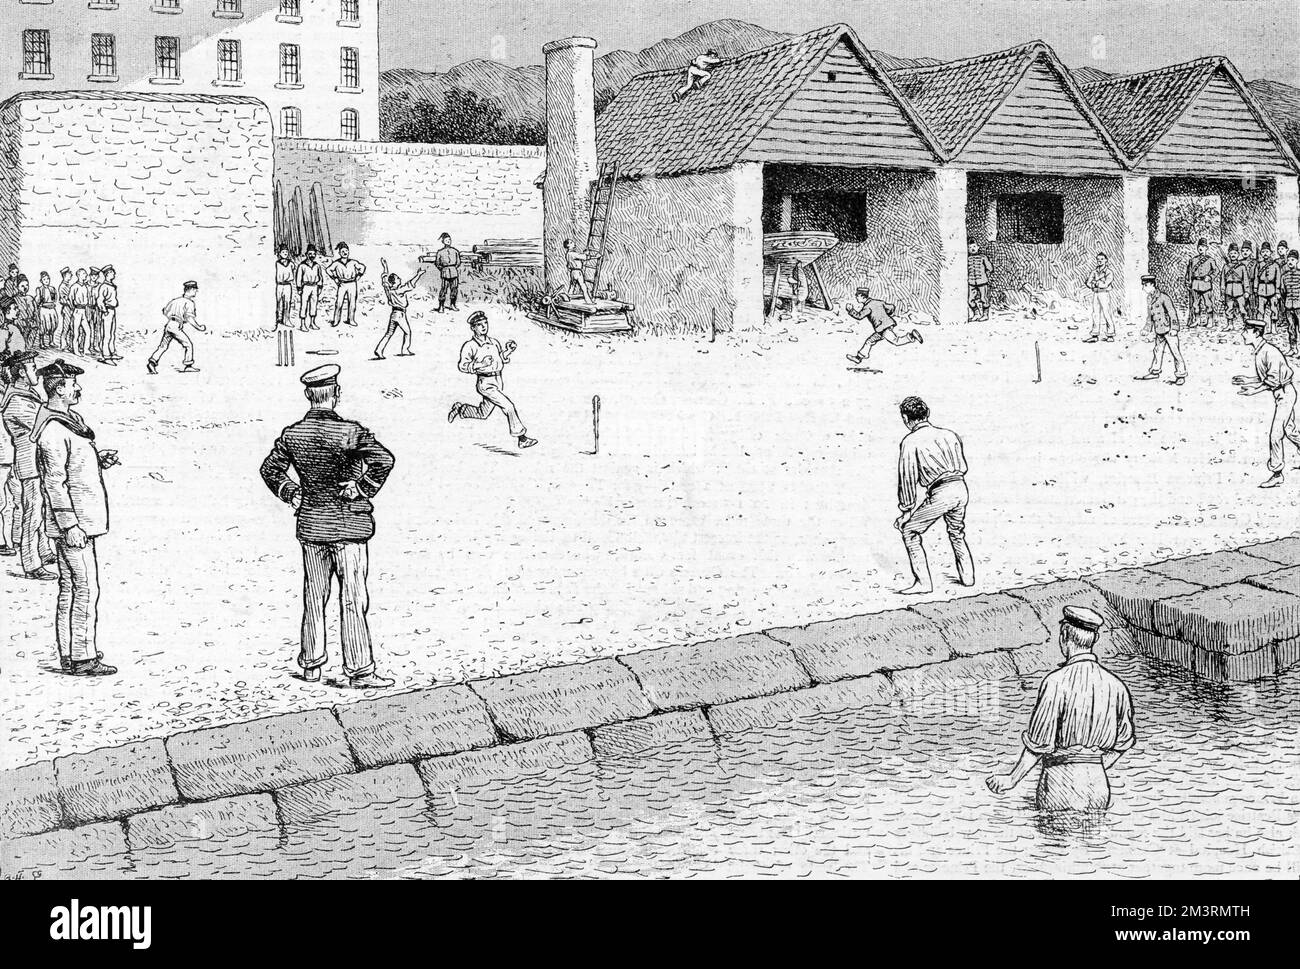 The Blockade of Crete: British Officers Playing Rounders in Suda Dockard.  The Englishman must have his sport wherever he goes and the naval officers on board our ships lying off Crete are no exception to the rule.  Having obtained leave to land, a dozen officers, principally midshipmen, one afternoon took on shore some stumps and a ball.  Rounders was the game chosen.  On account of the ground a rule was made that either side hitting the ball into the sea or onto the roofs should be out.  Some remarkable fielding was witnessed.  Once the ball went into the sea and the fielder after it!      D Stock Photo